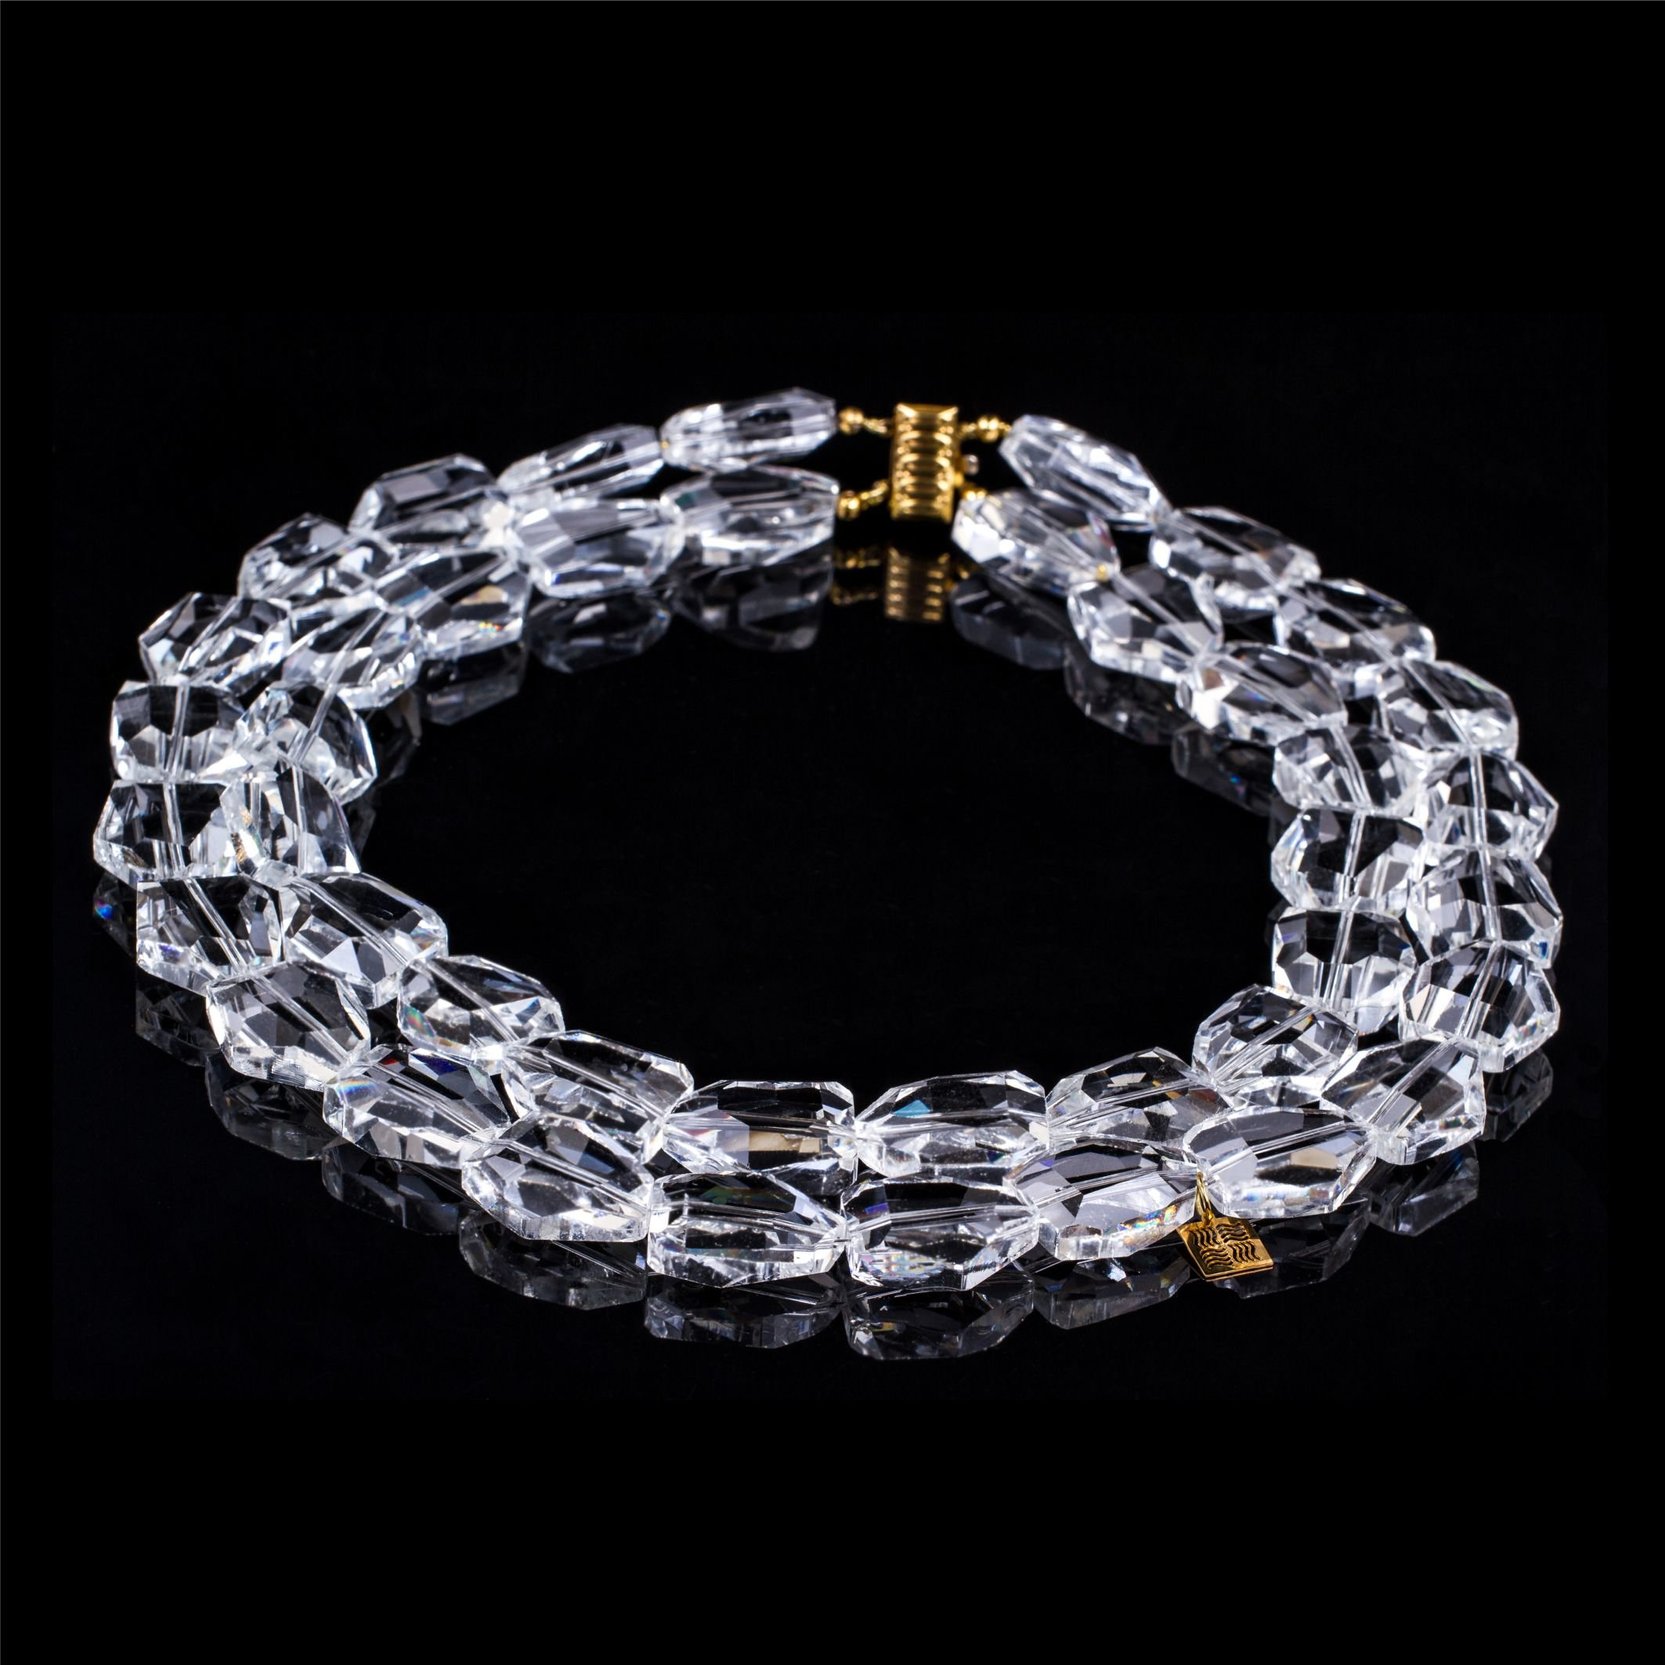 Necklace from the collection "Crystal Symphony"